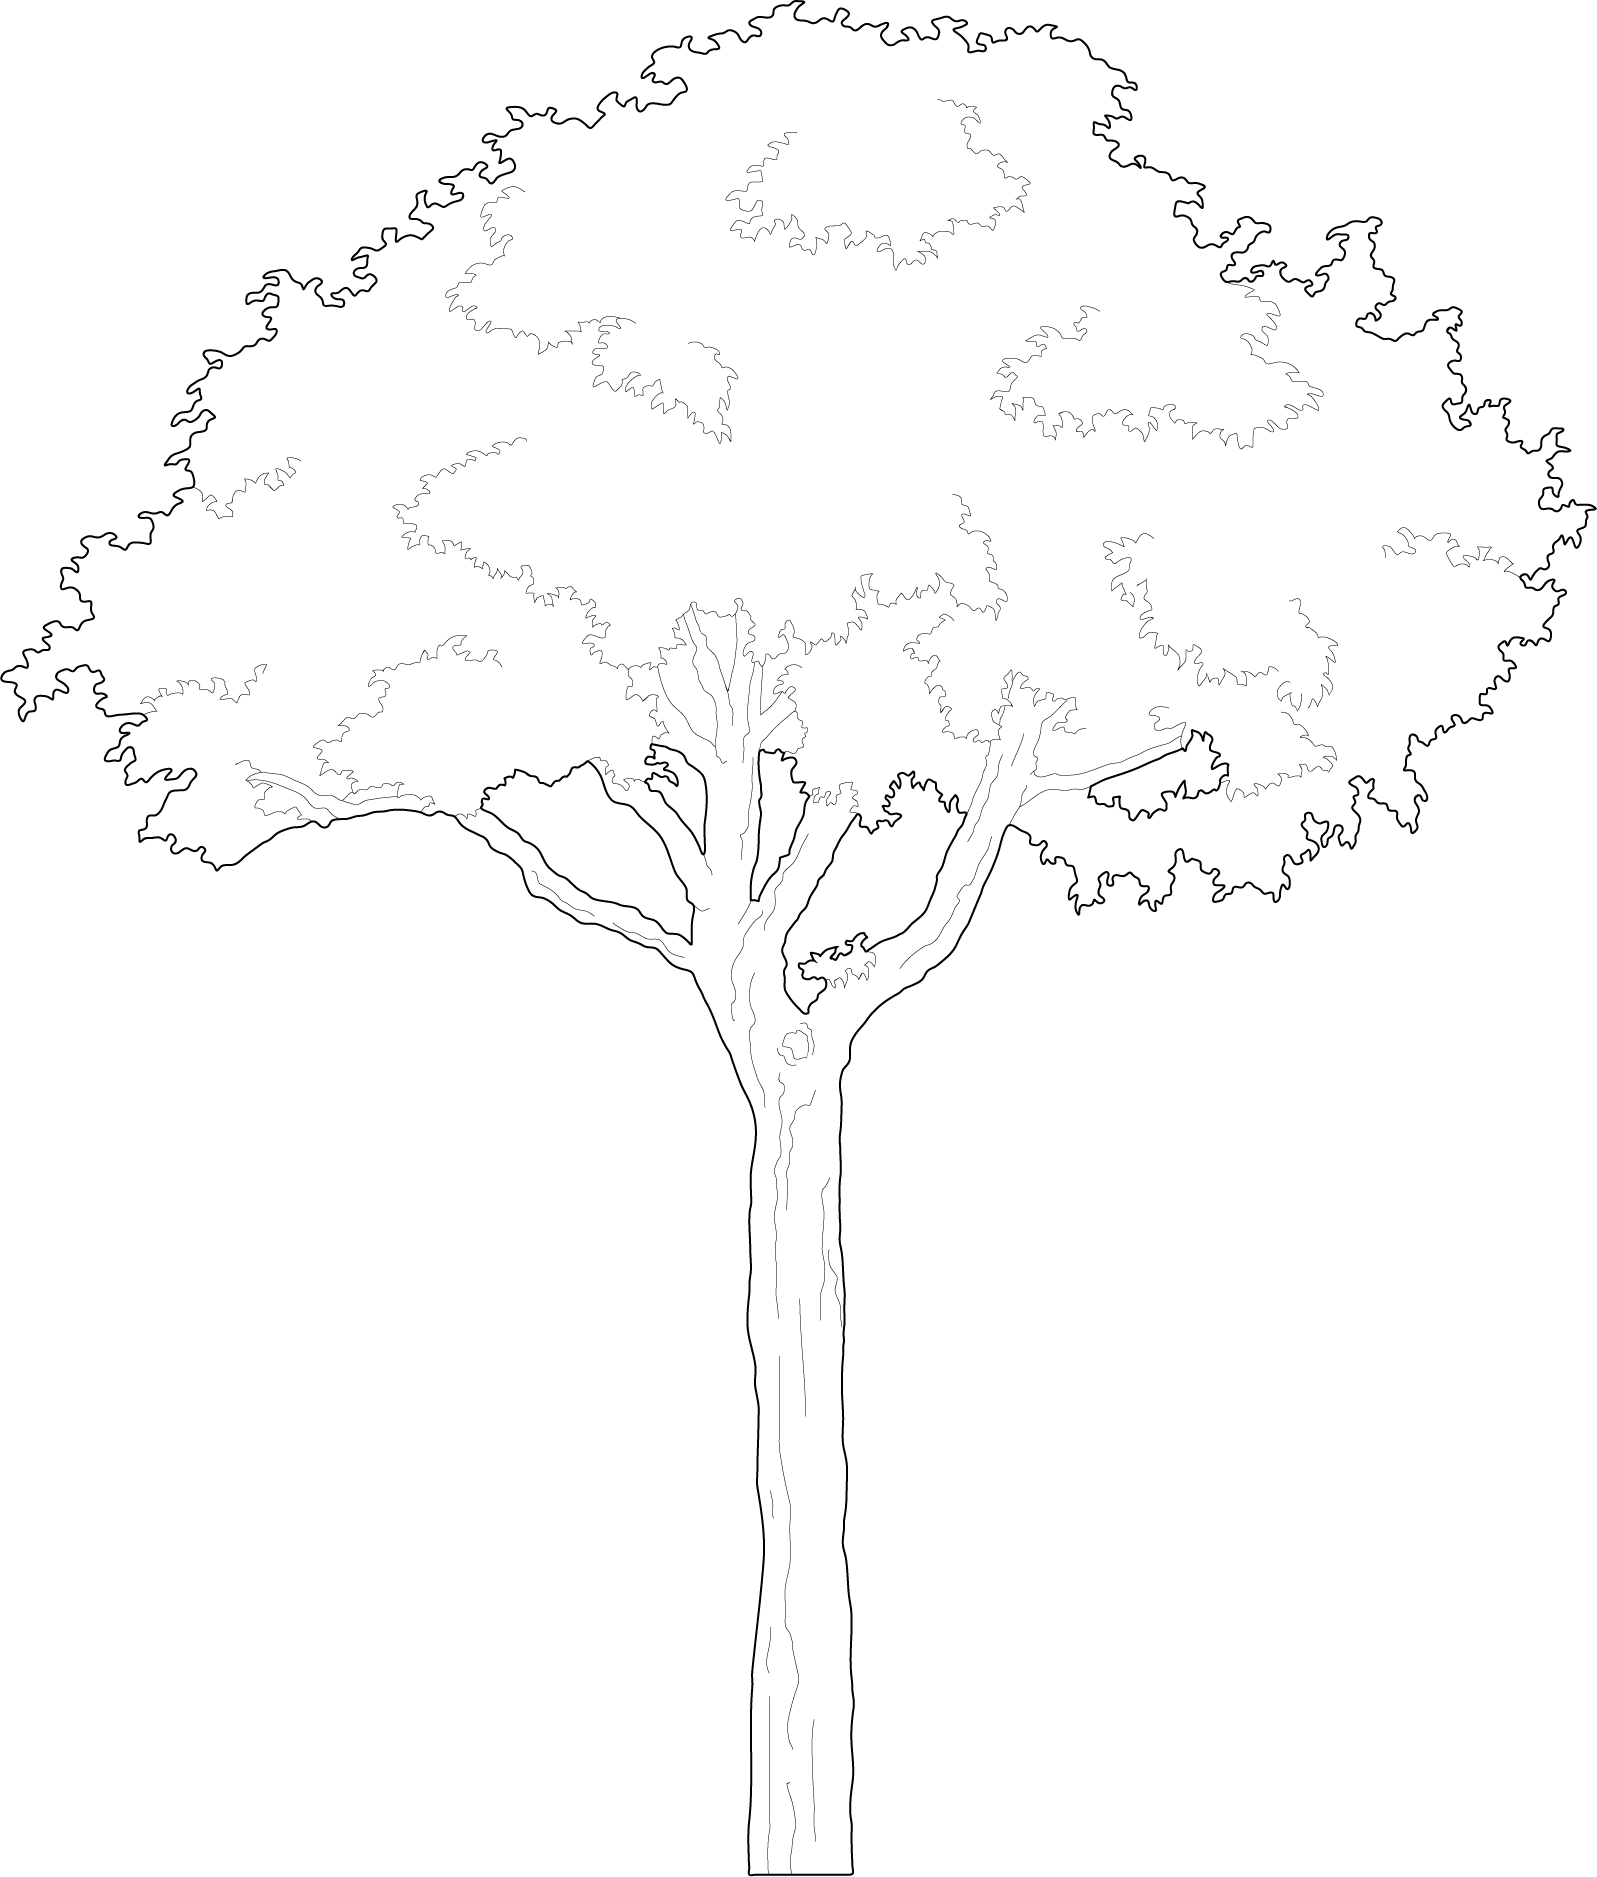 Clean and minimalist vector tree illustration for architectural projects and presentations cad blocks